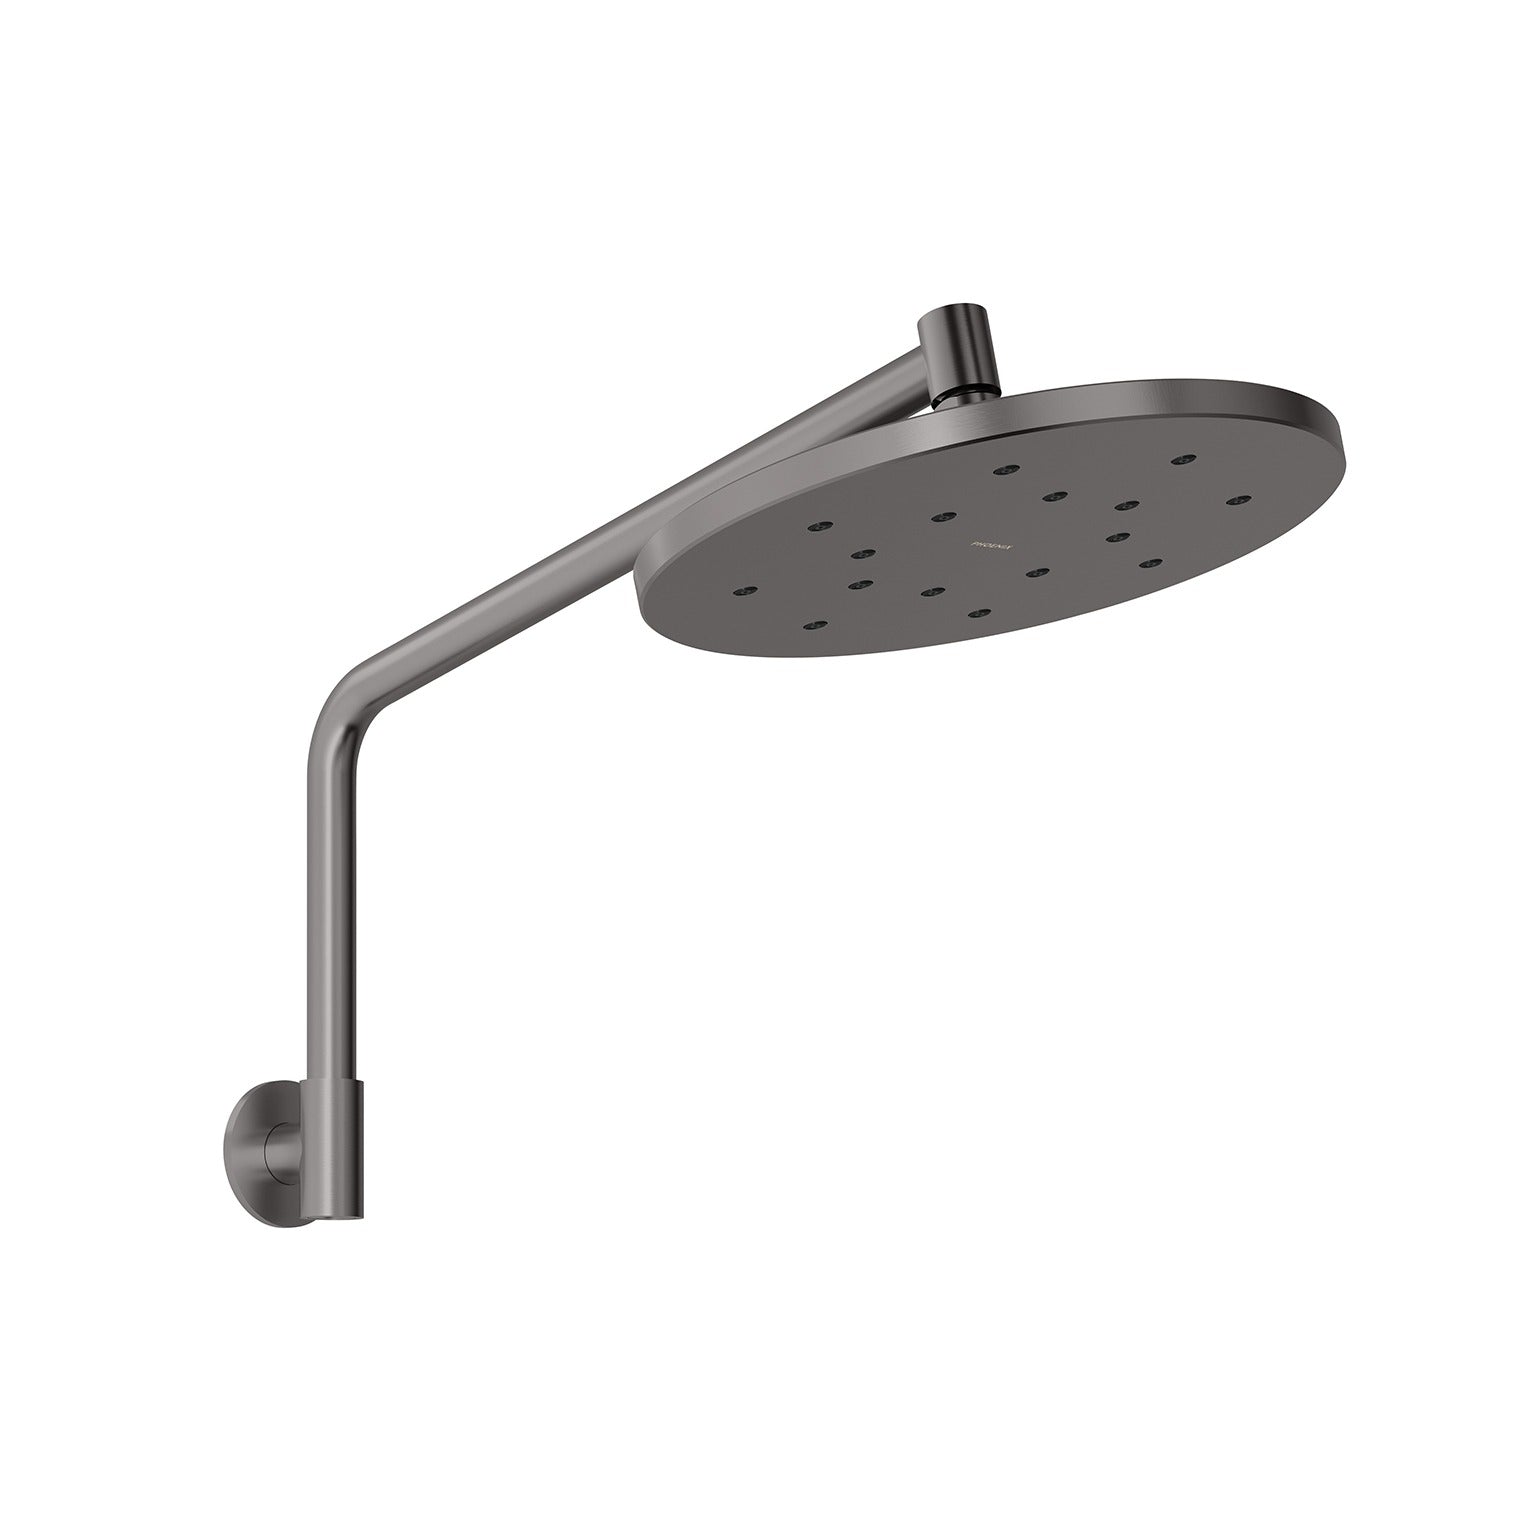 PHOENIX ORMOND HIGH-RISE SHOWER ARM AND ROSE BRUSHED CARBON